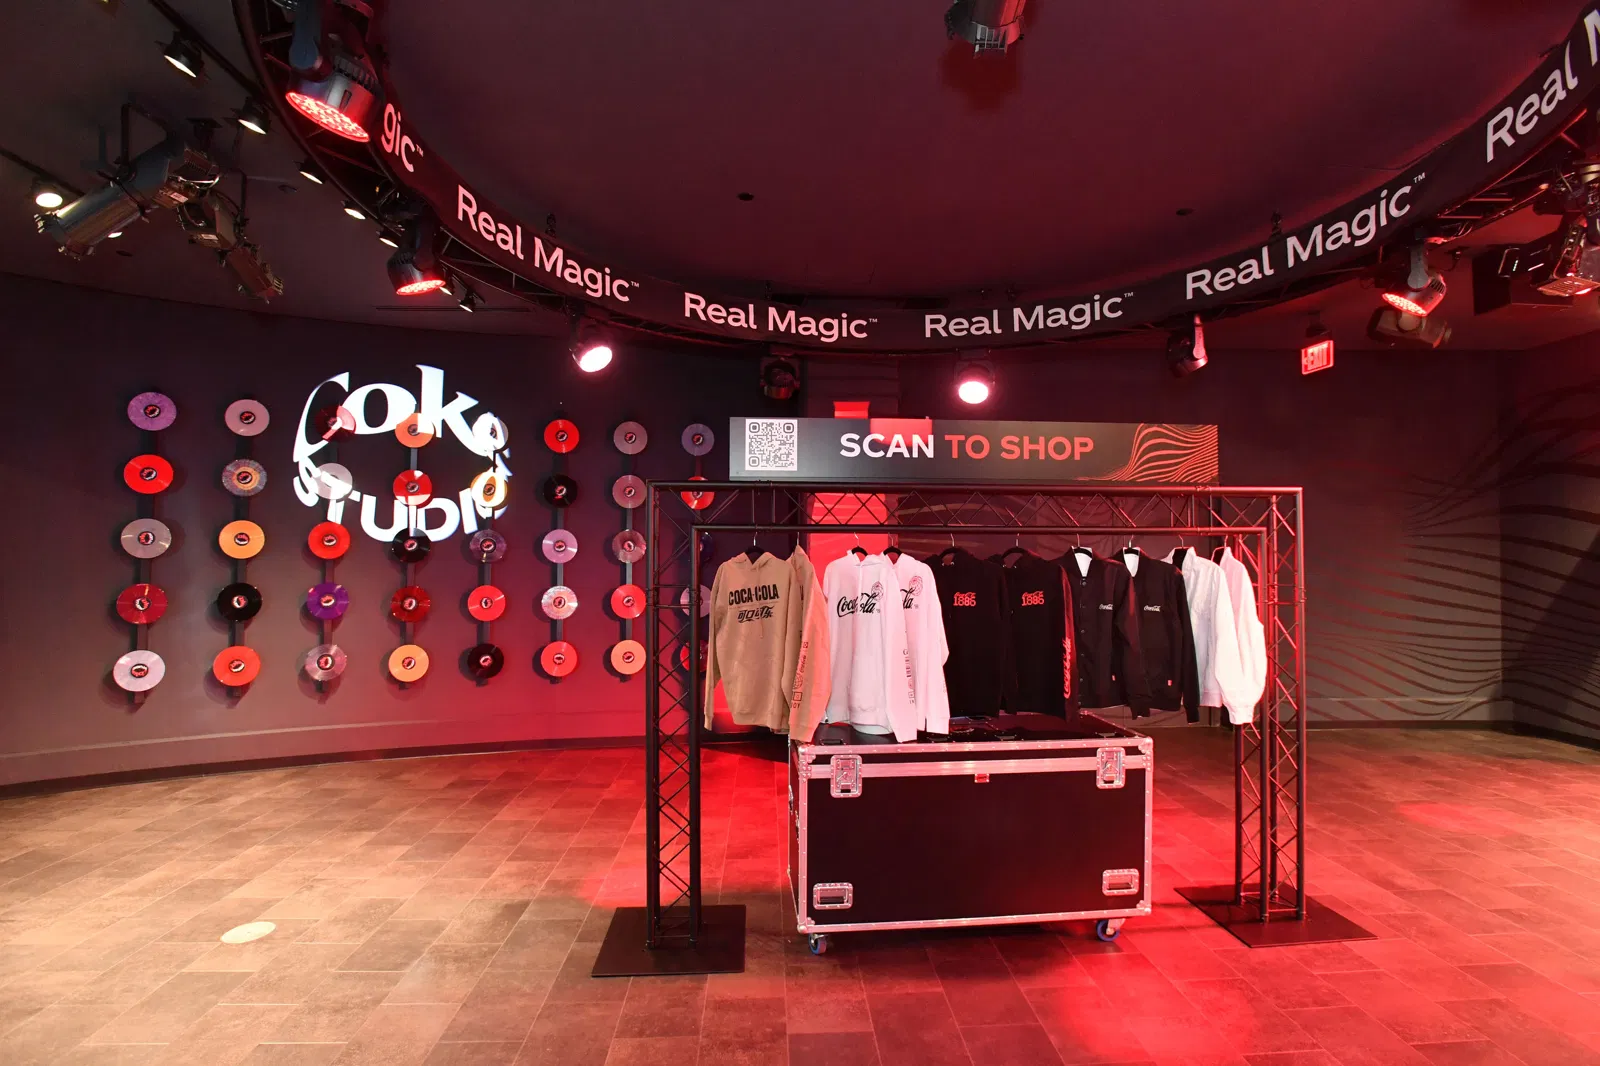 The red showroom with a musical theme. Vinyl records hang on the walls, the Coke Studio sign is illuminated, and in the center, under the spotlights, there is a display rack with branded clothing